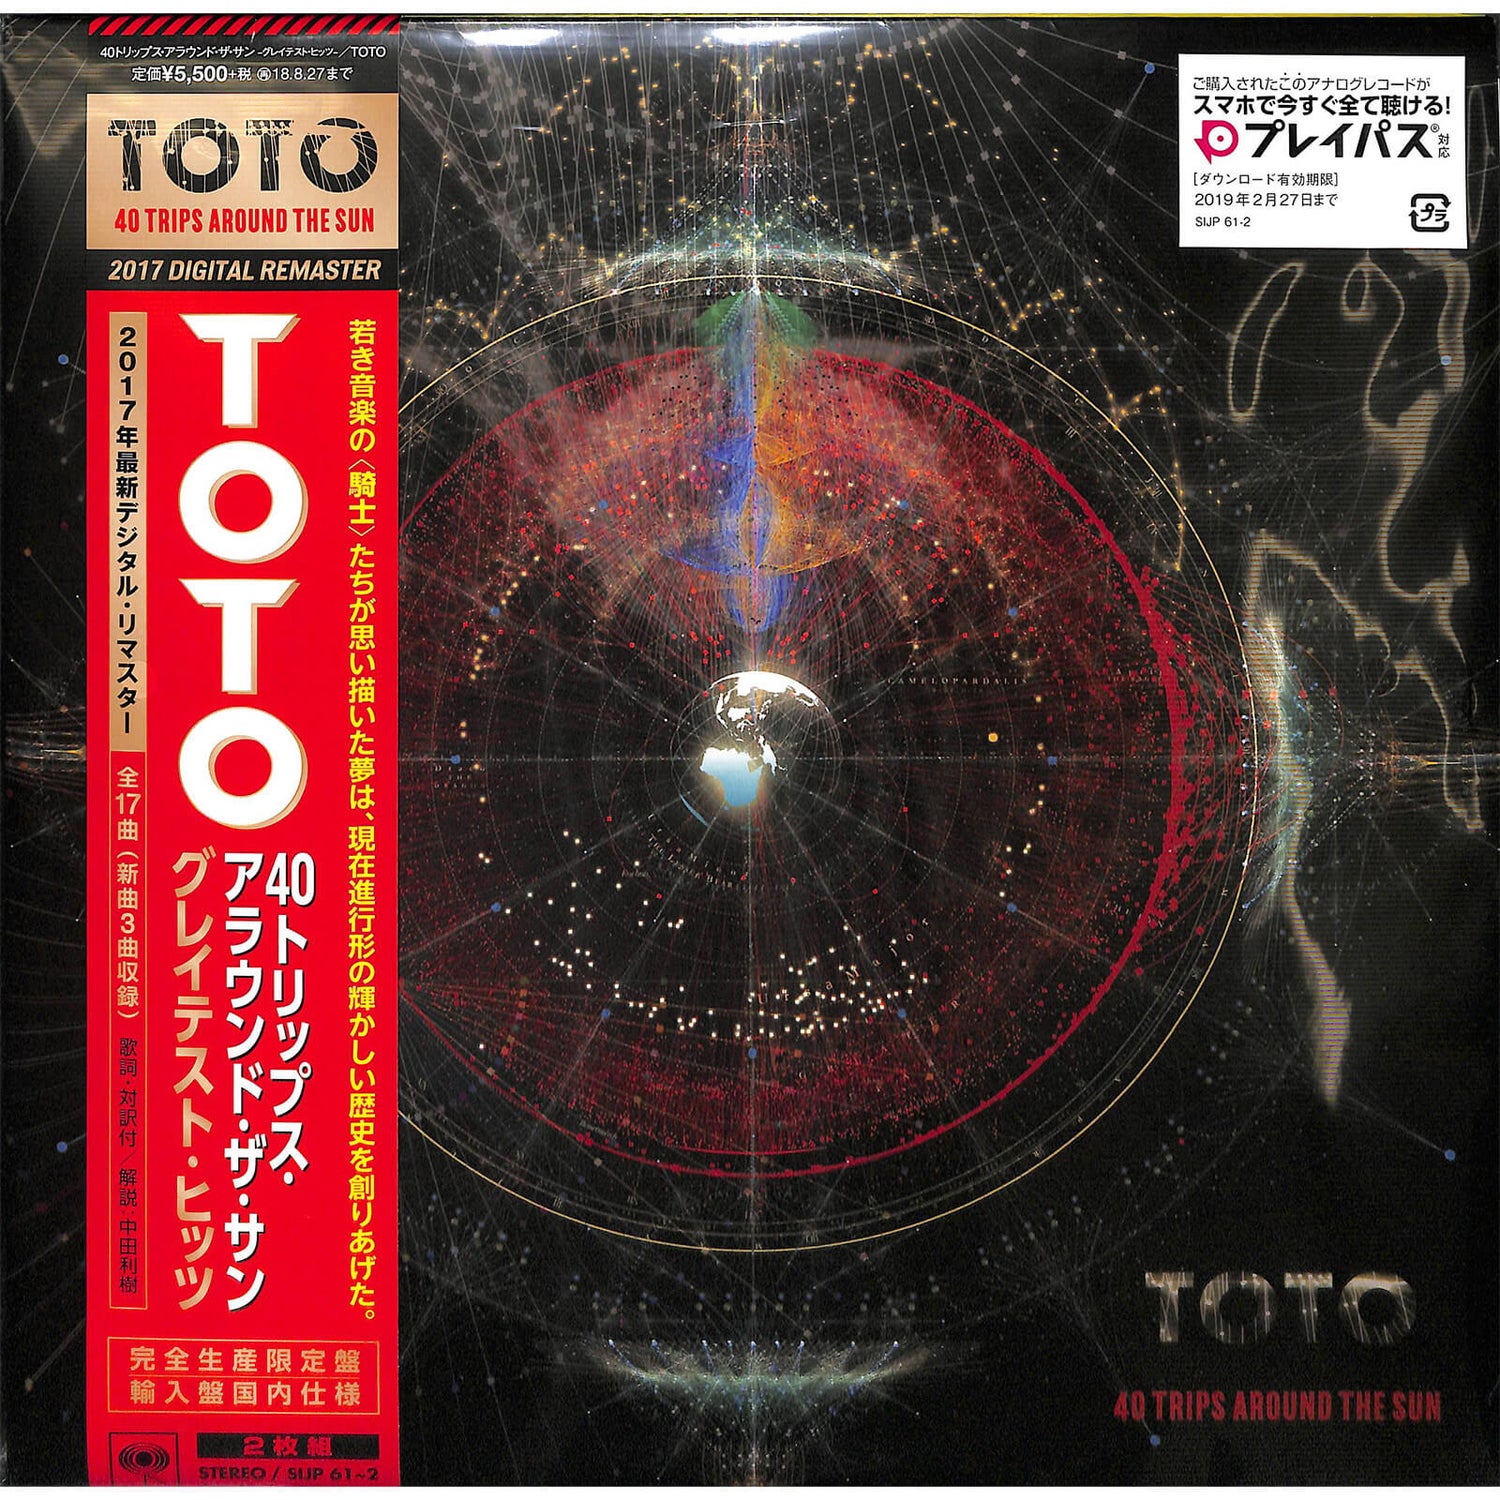 Toto - 40 Trips Around The Sun -Greatest Hits- (Limited Edition) Vinyl Japanese Edition